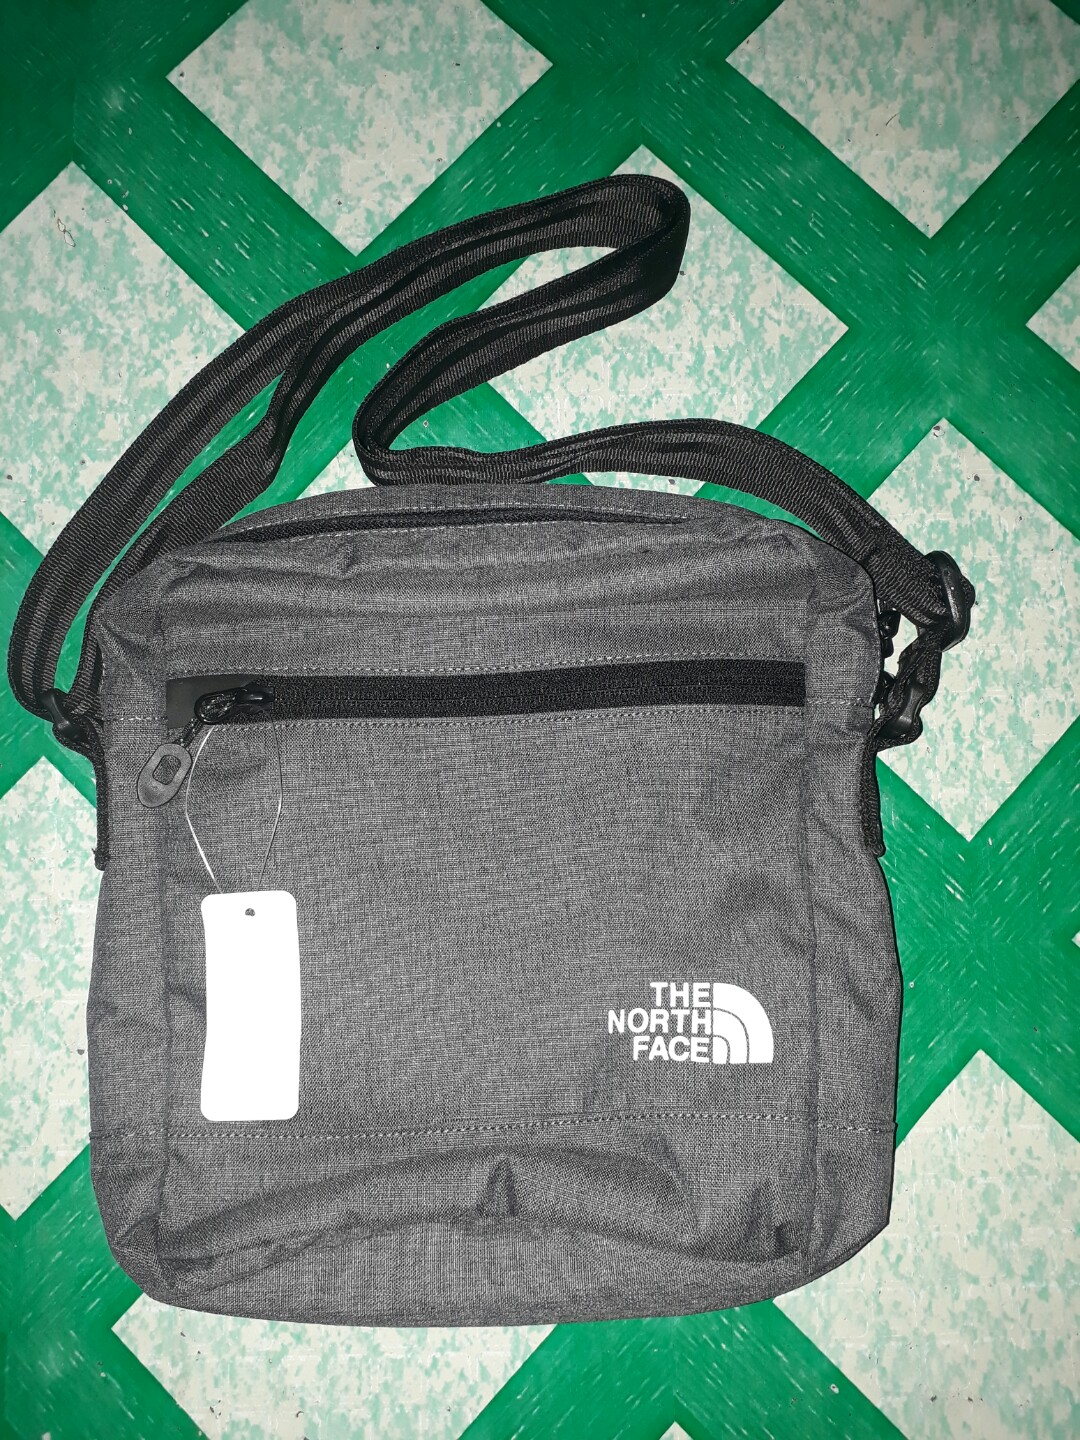 ORIGINAL! The North Face Sling Bag, Men's Fashion, Bags, Sling Bags on ...